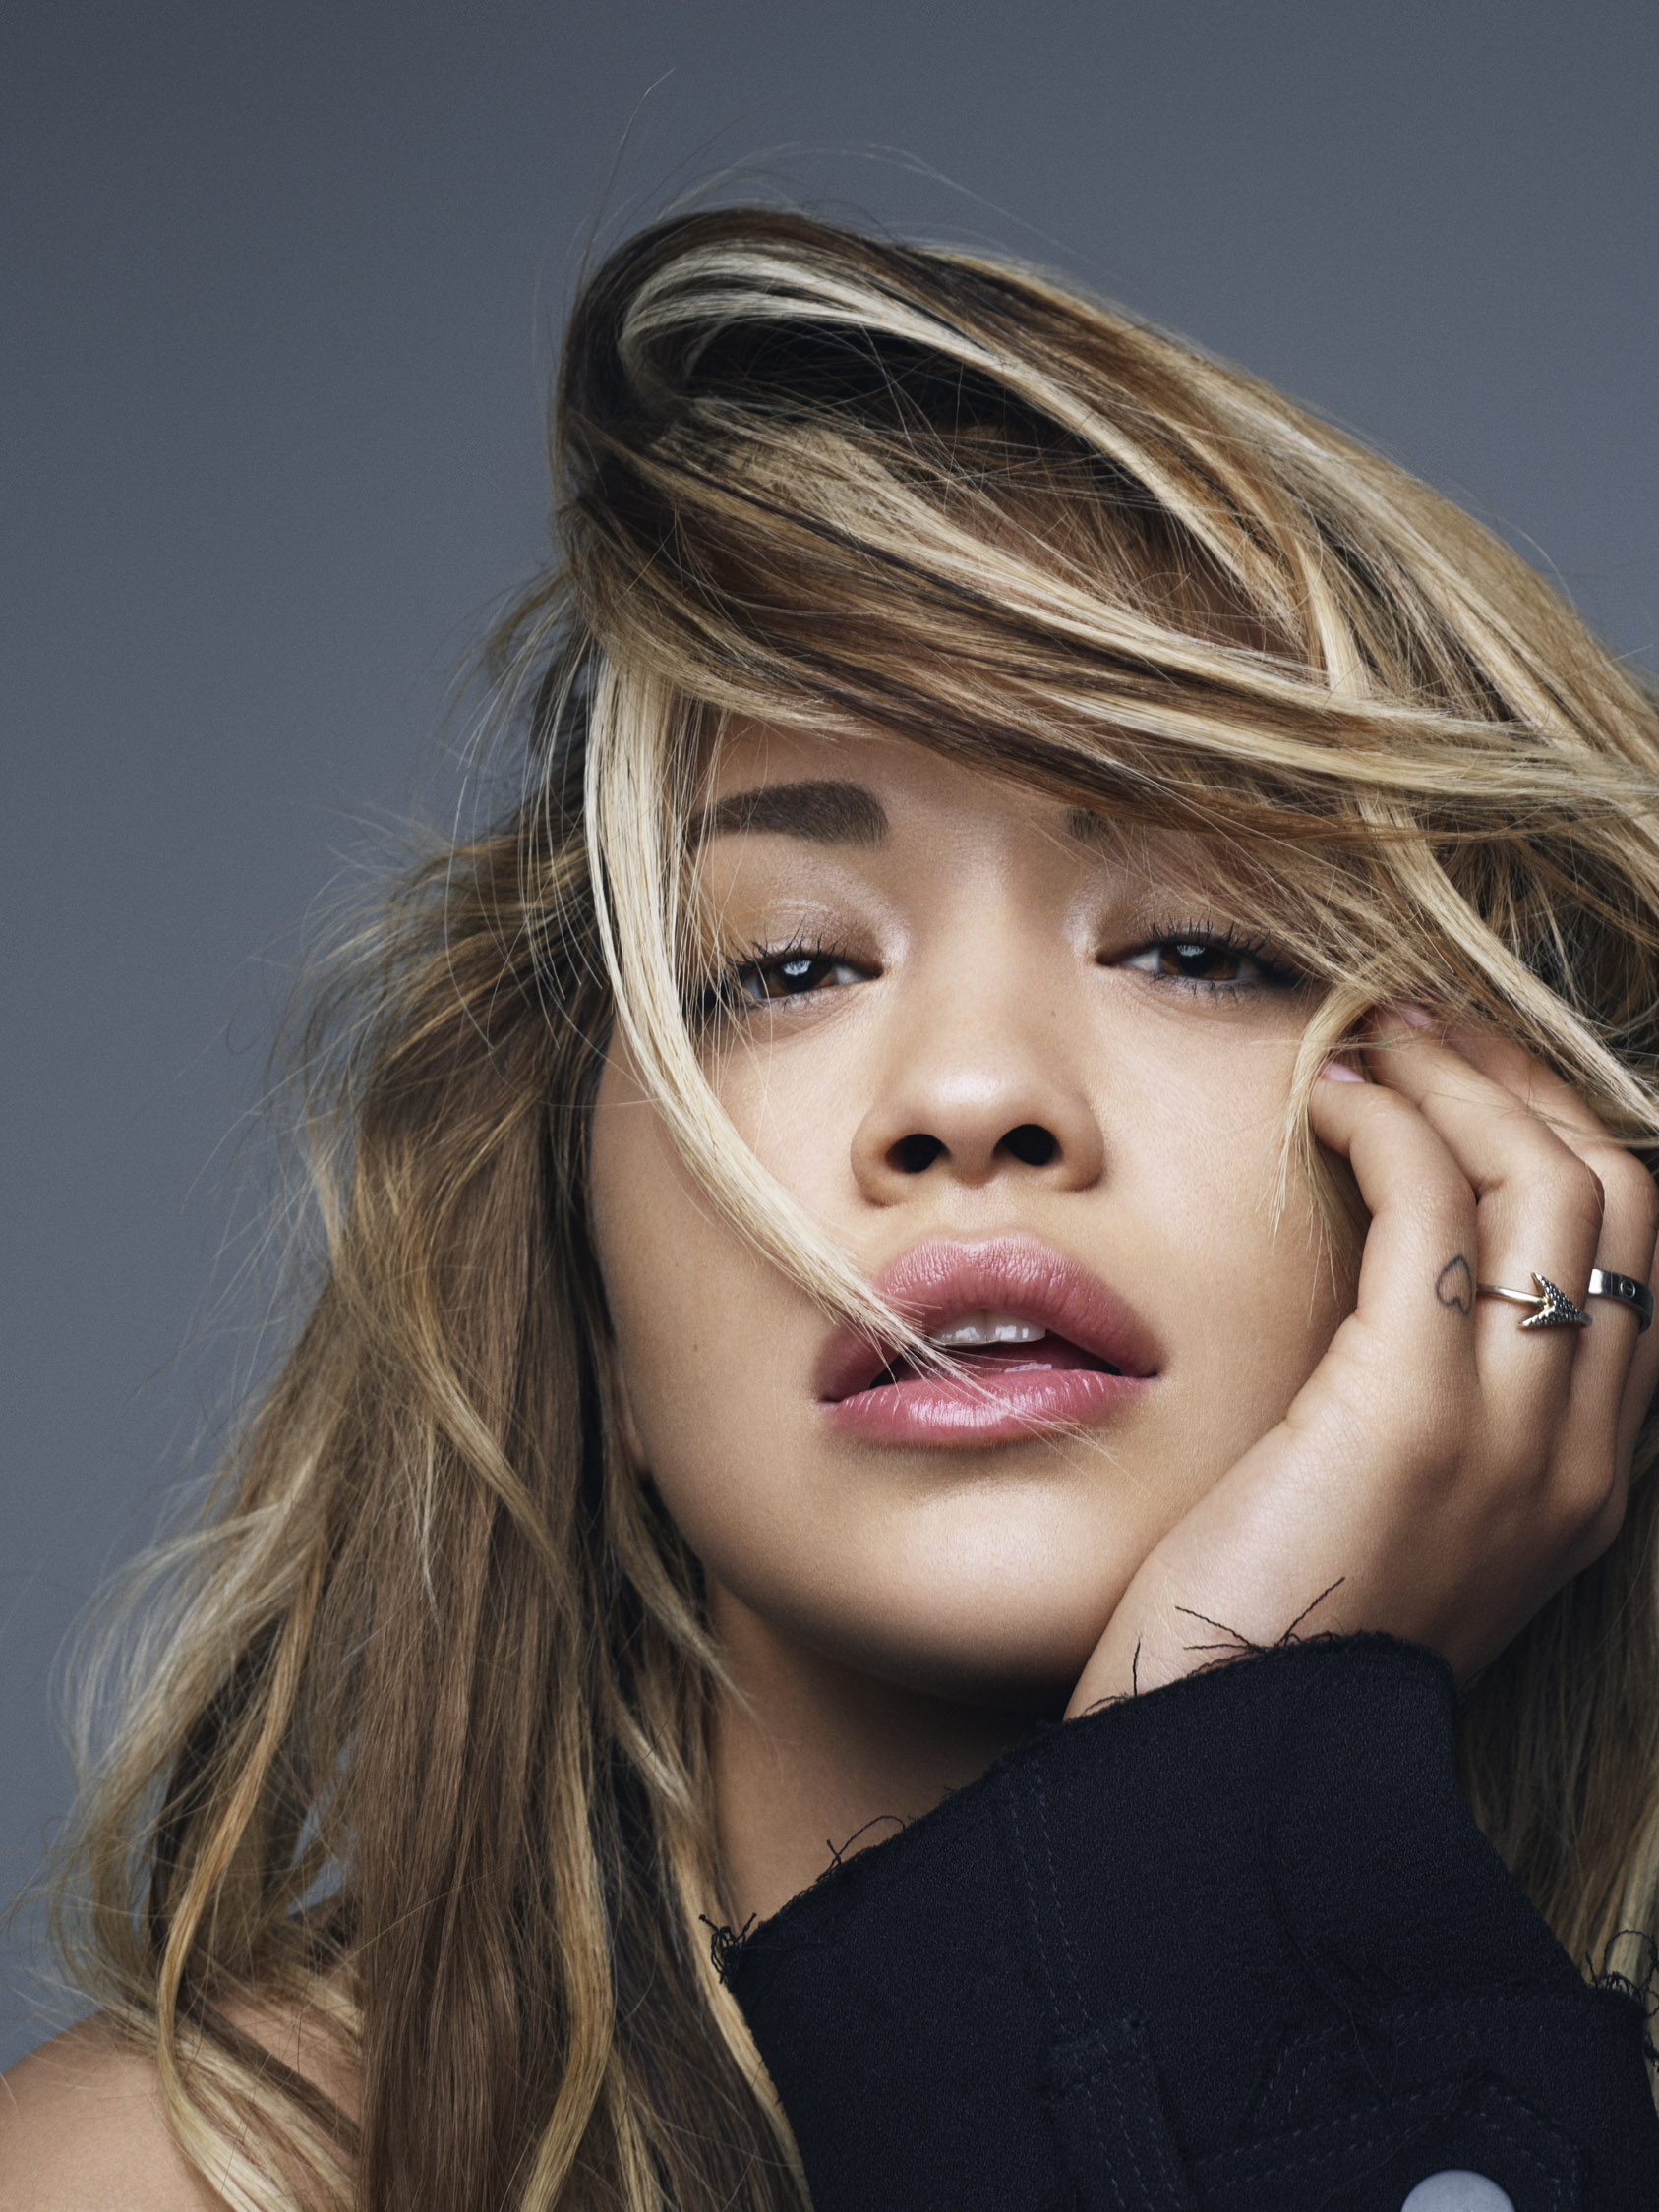 Rita Ora joins Absolut with The Open Mic Project to use music as a way to bring people together.